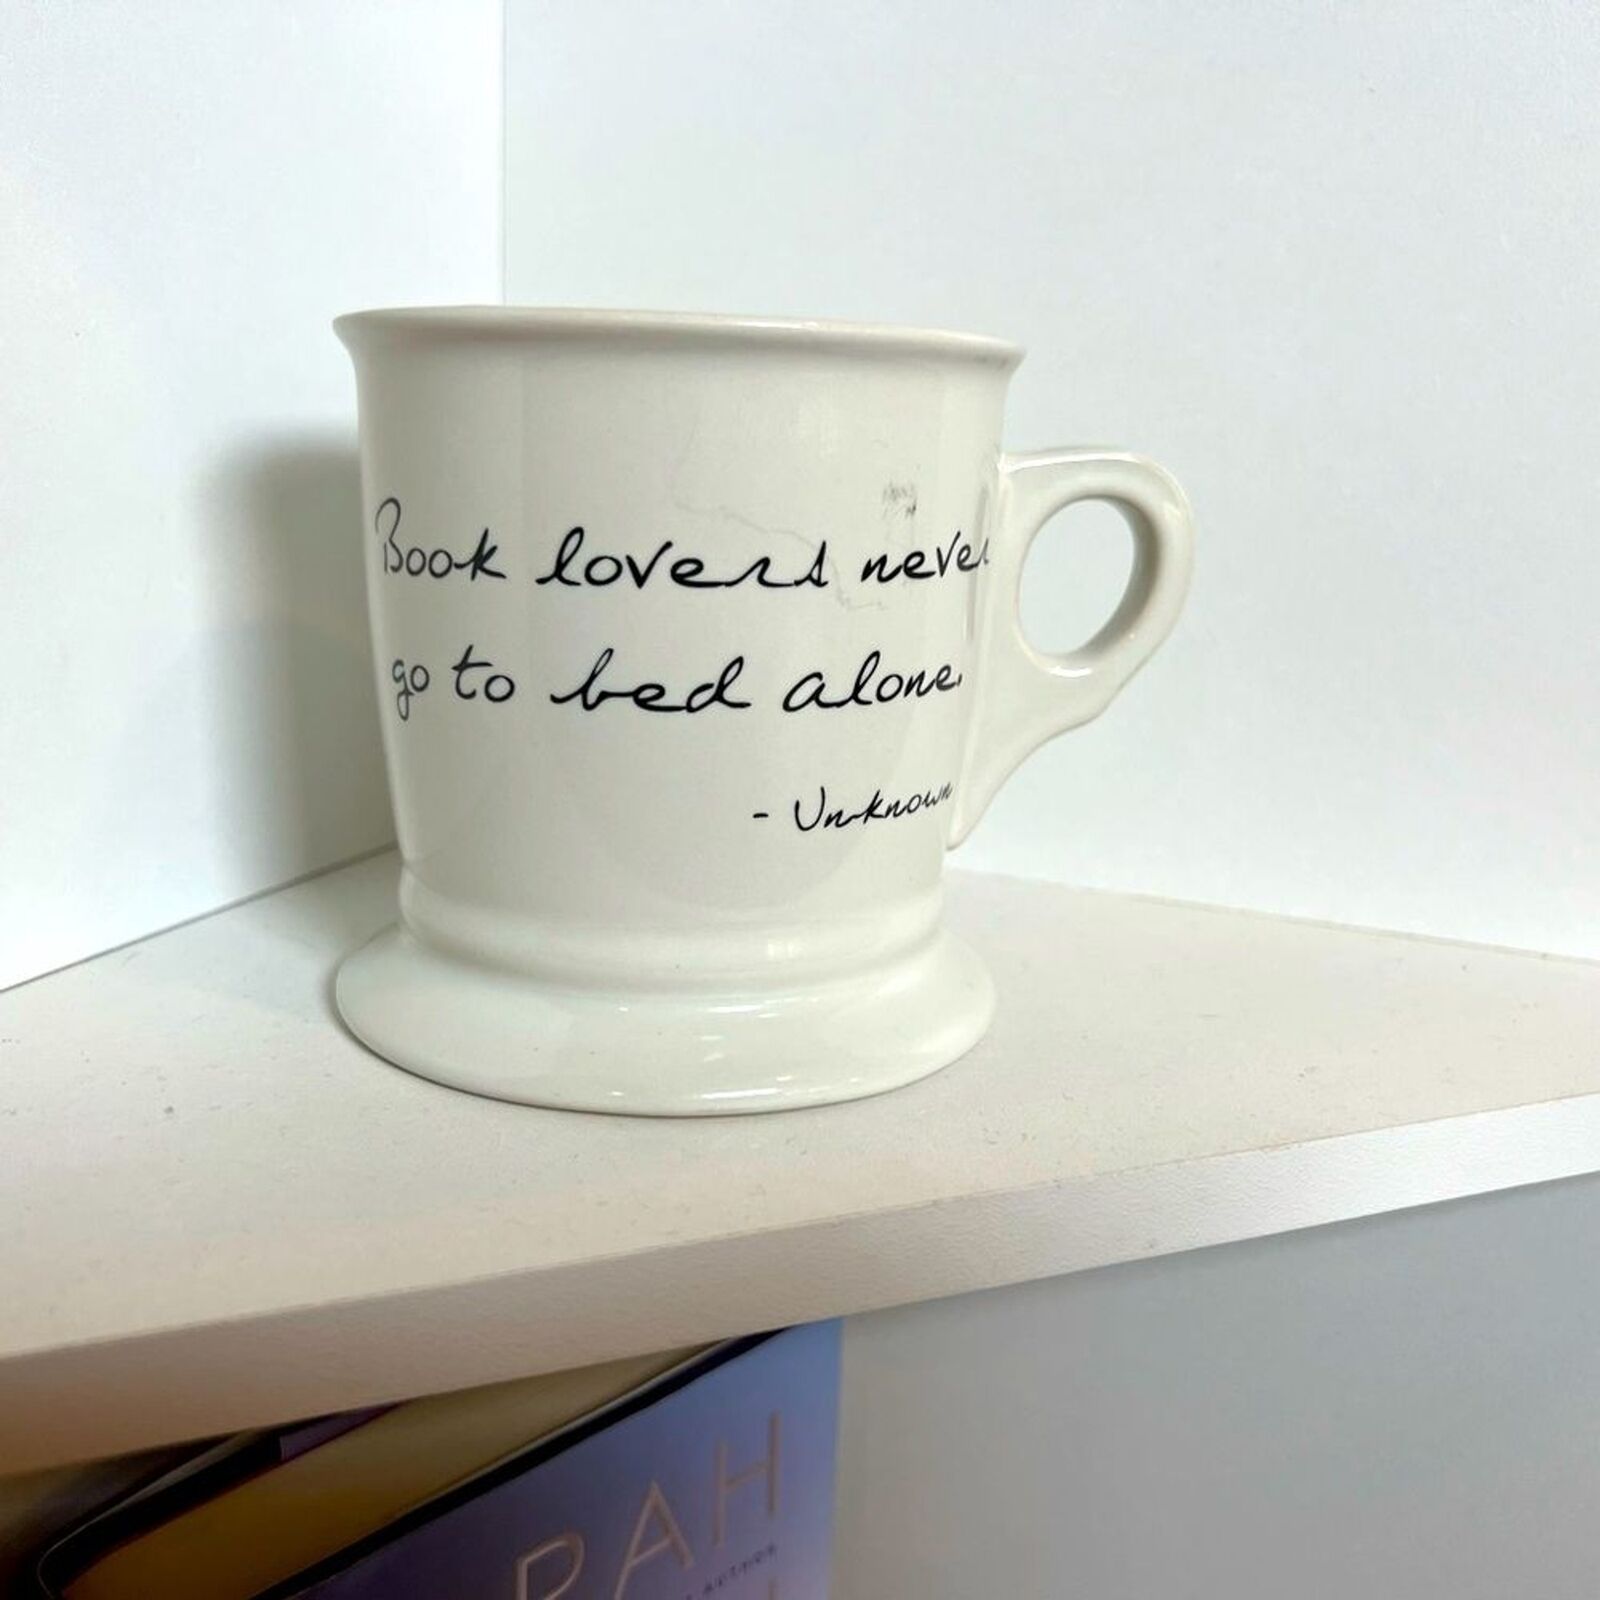 Barnes and Noble “book lovers never go to bed alone” coffee mug. GUC 2006 model